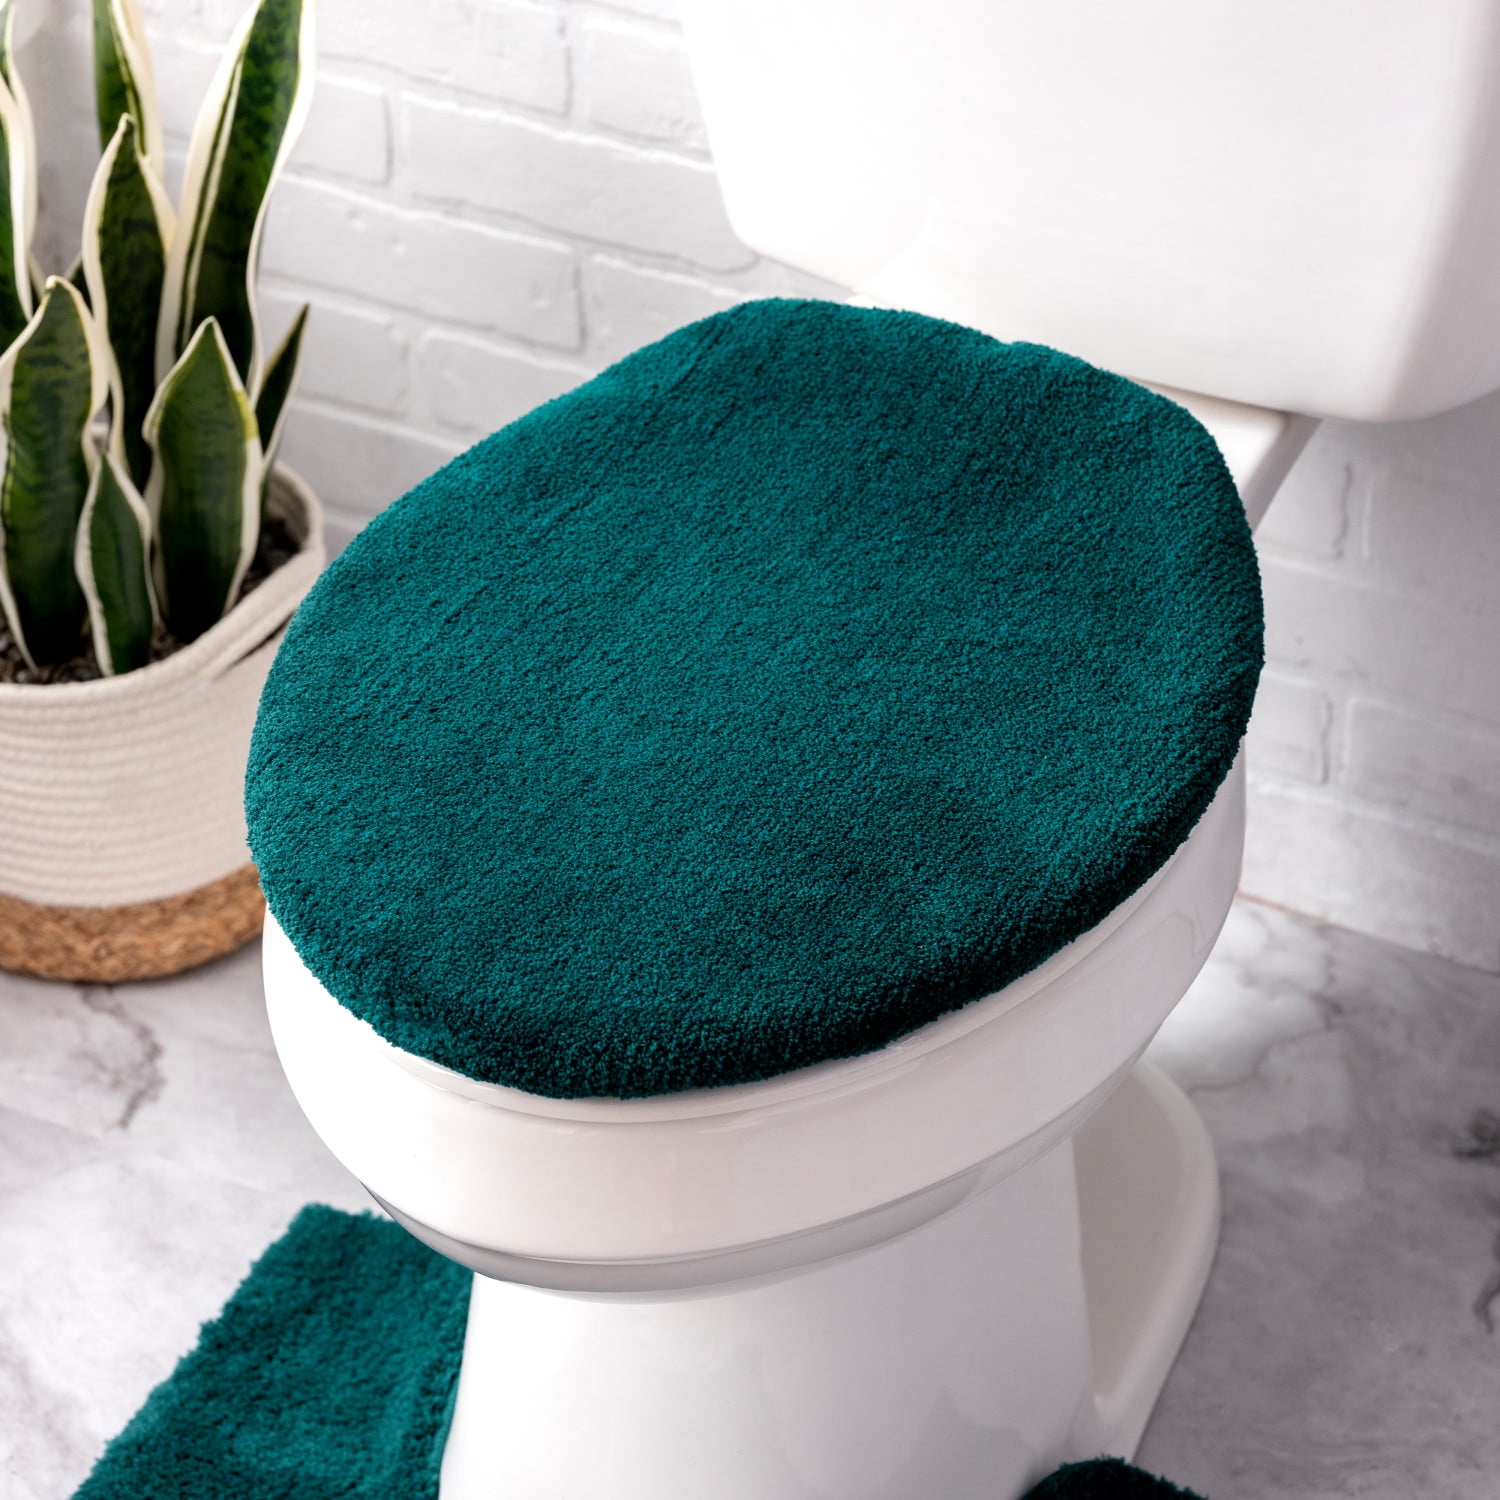 TURQUOISE TERRY CLOTH ELONGATED TOILET SEAT LID COVER